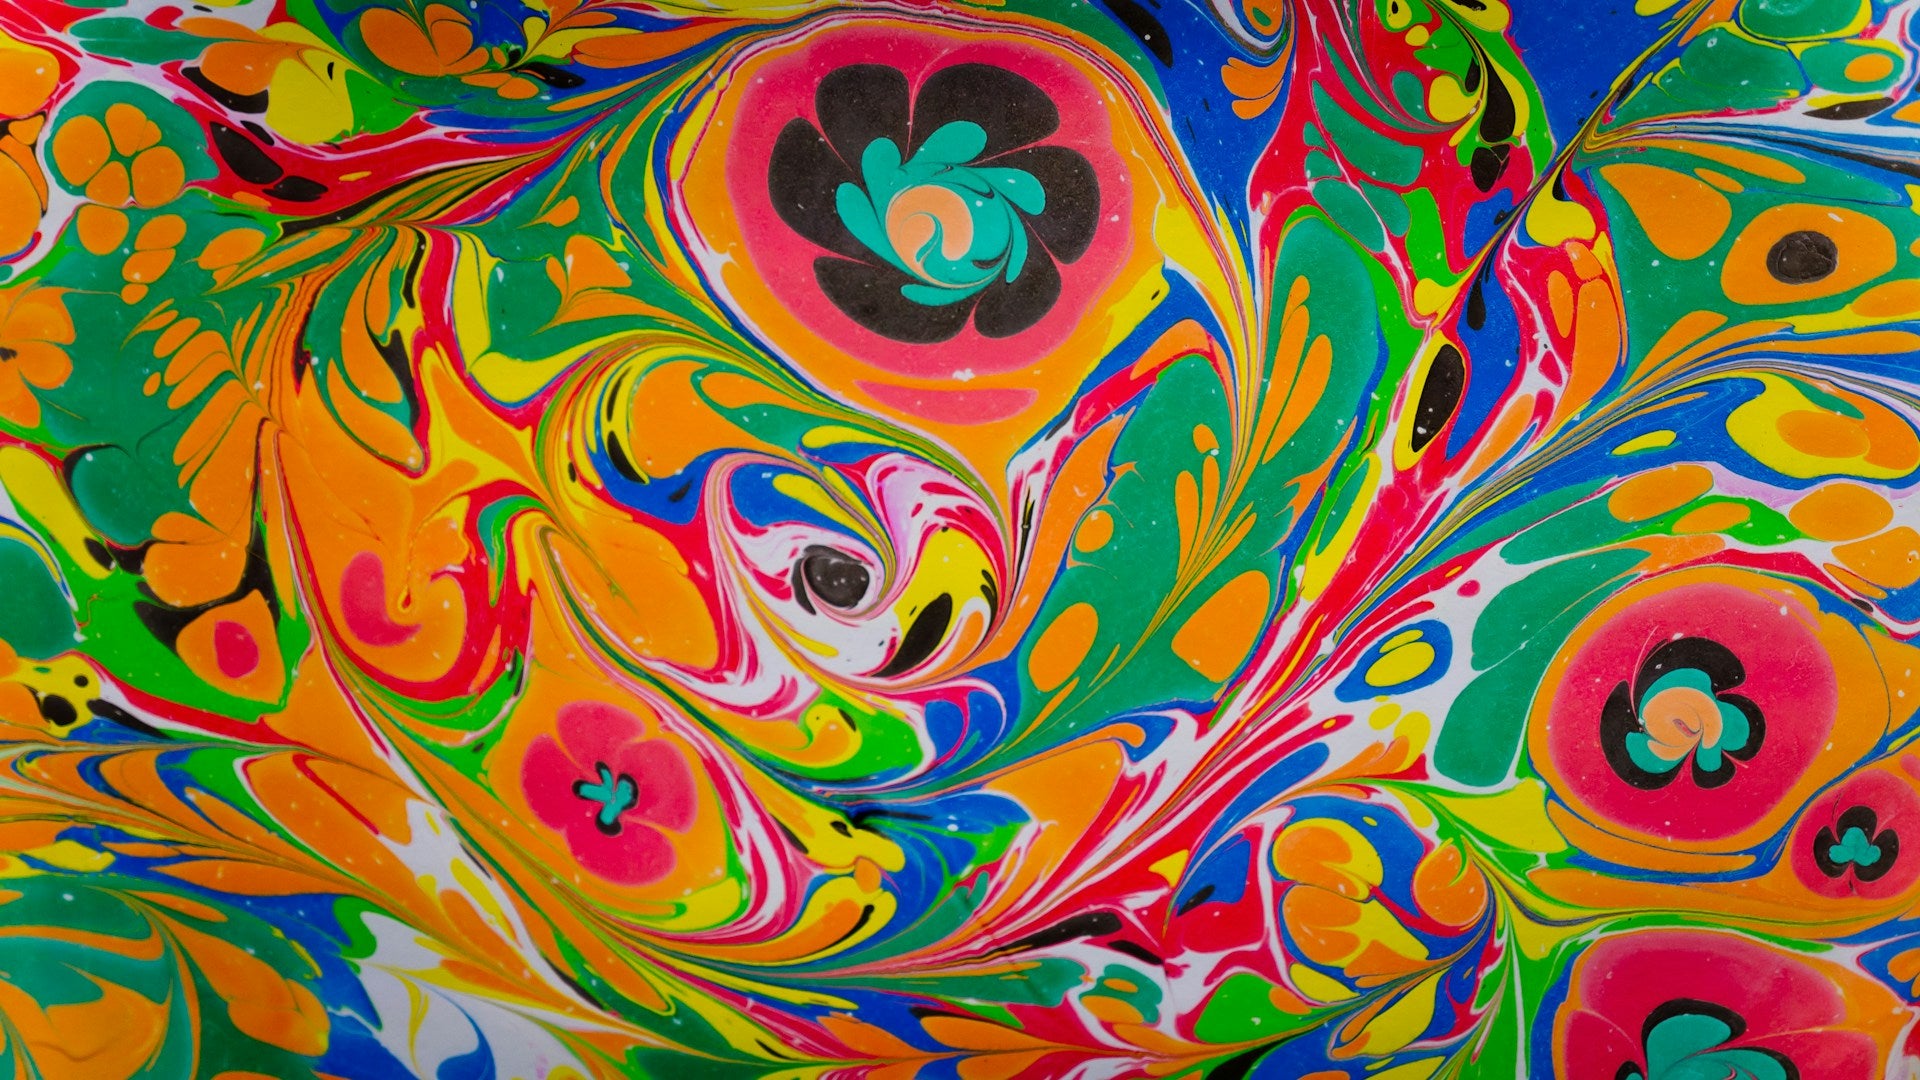 Colorful paint swirled into a floral, abstract pattern.